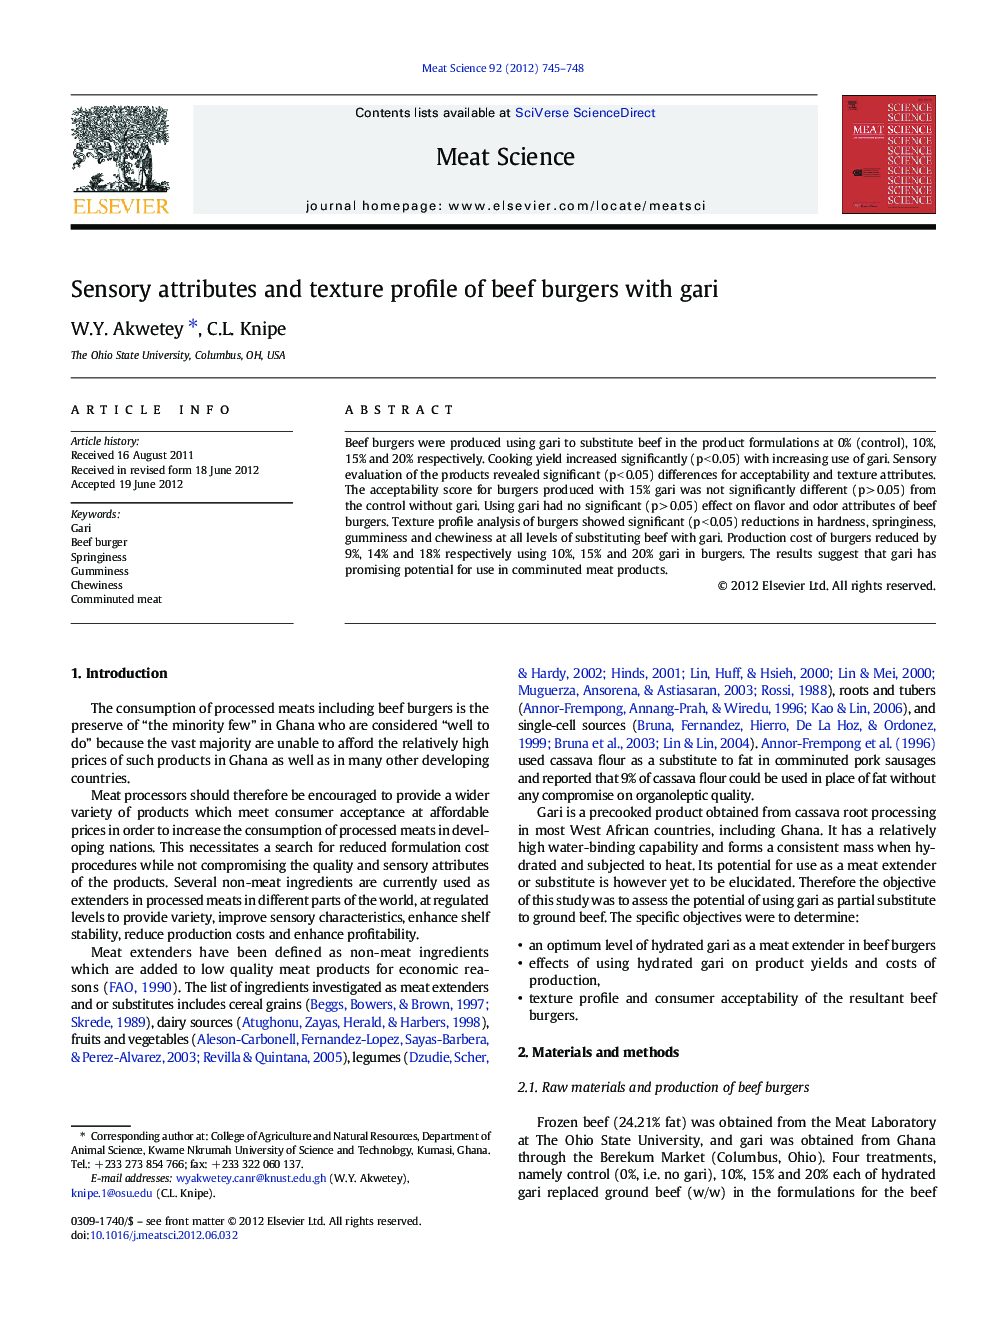 Sensory attributes and texture profile of beef burgers with gari